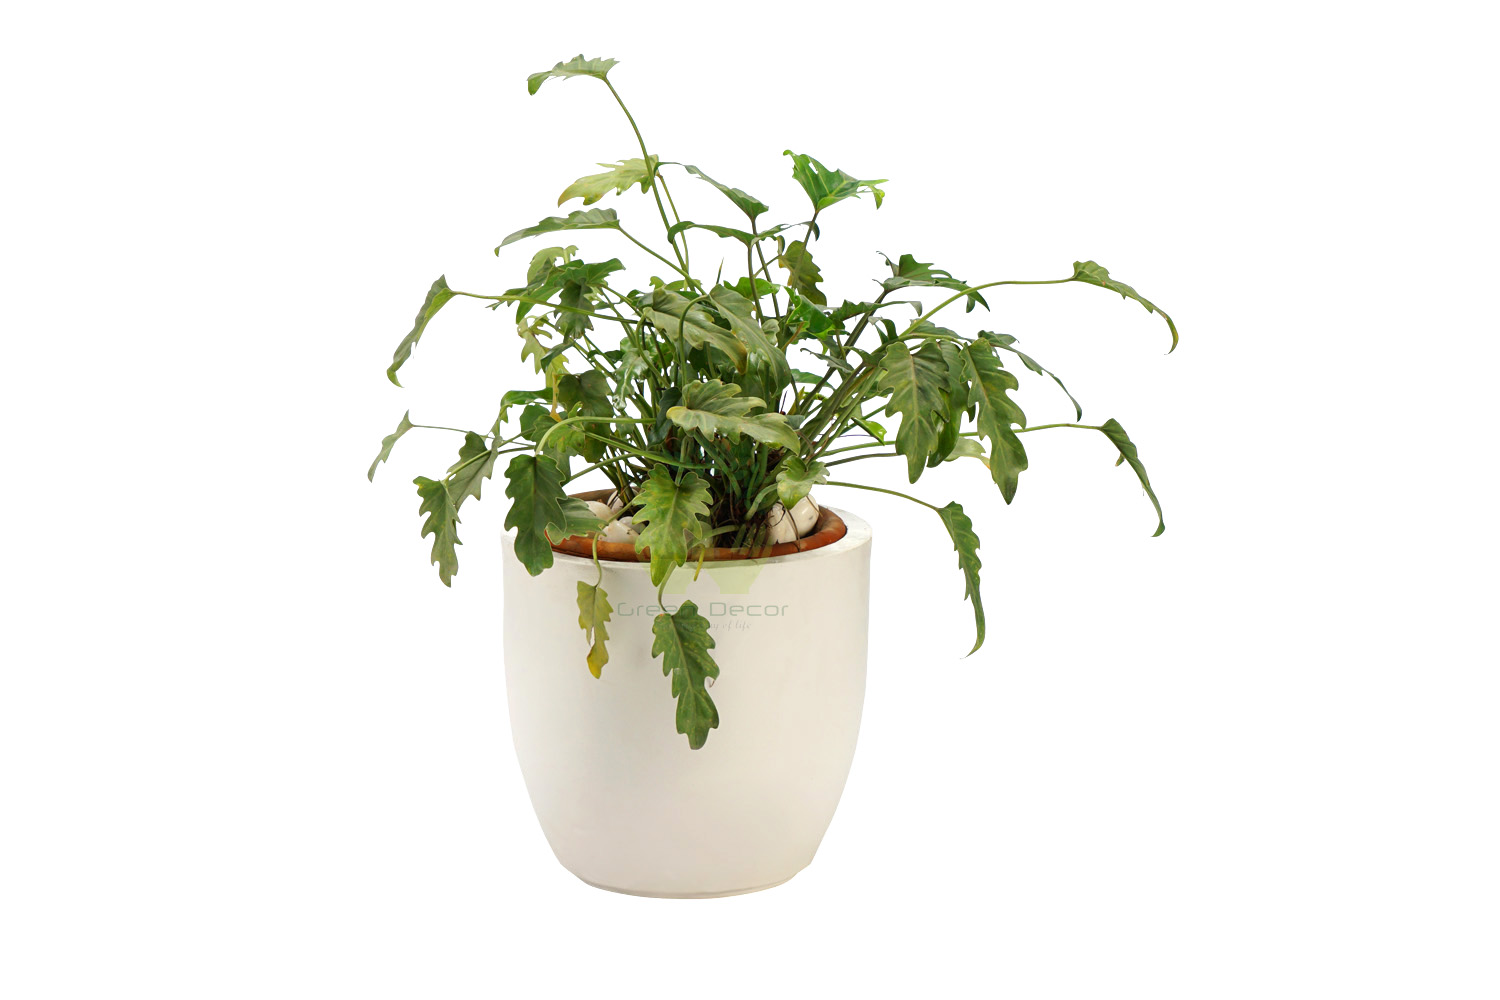 Buy Philodendron Xanadu Plant Front View, White Pots and Seeds in Delhi NCR by the best online nursery shop Greendecor.